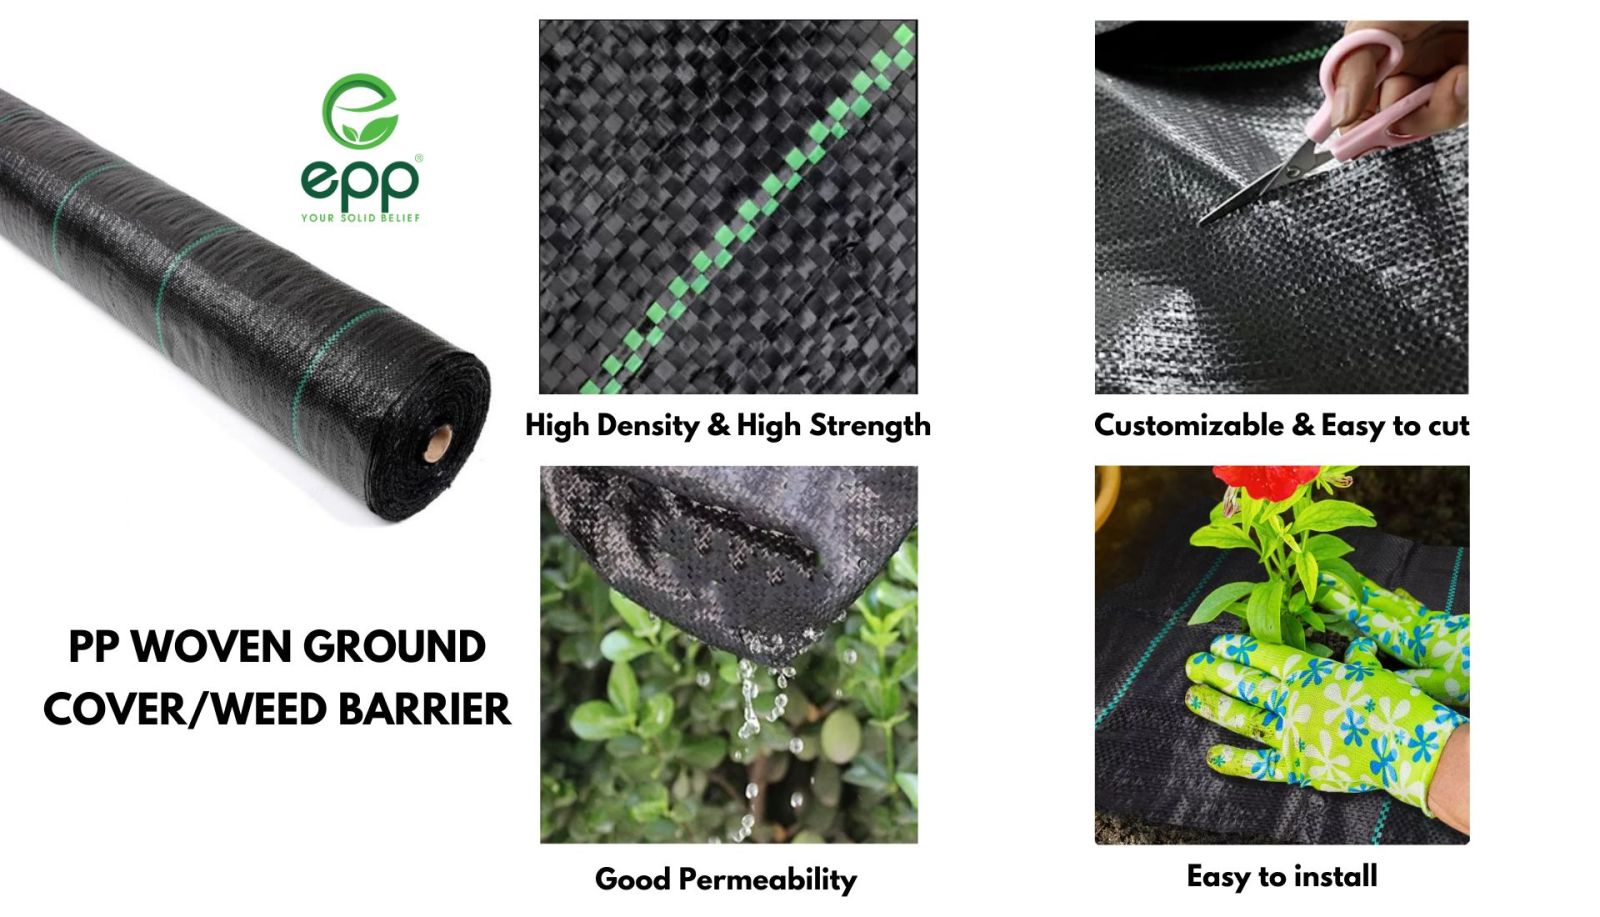 PP-WOVEN-GROUND-COVER-WEED-BARRIER.jpg